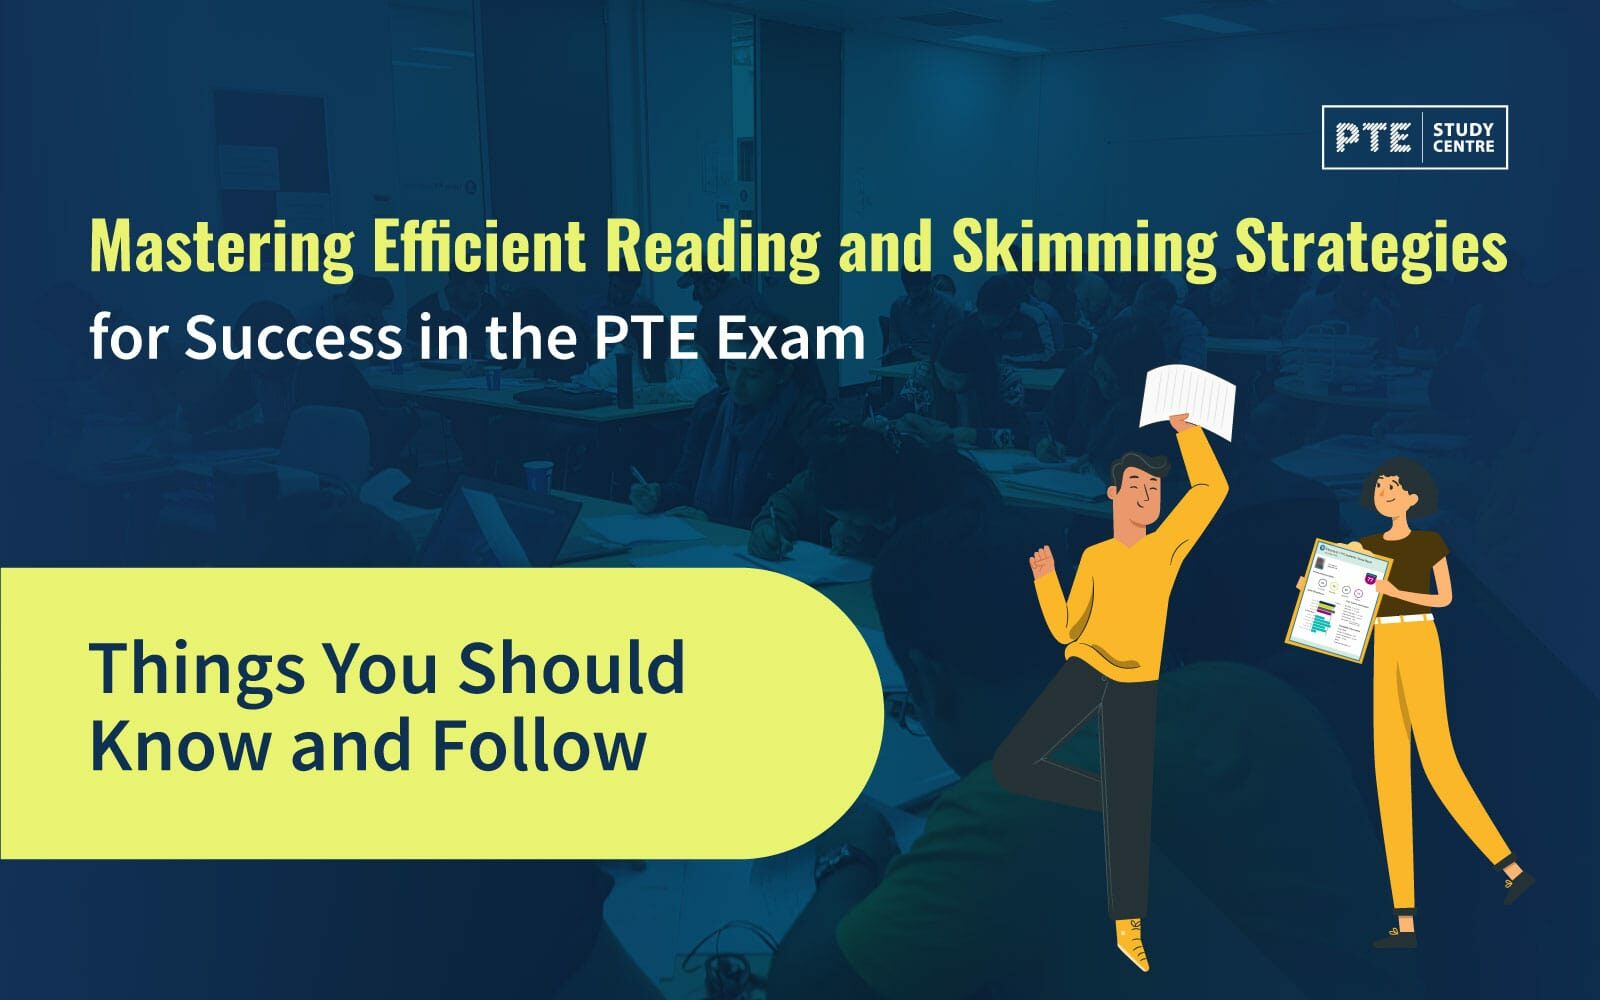 Mastering Efficient Reading and Skimming Strategies for Success in the PTE Exam image